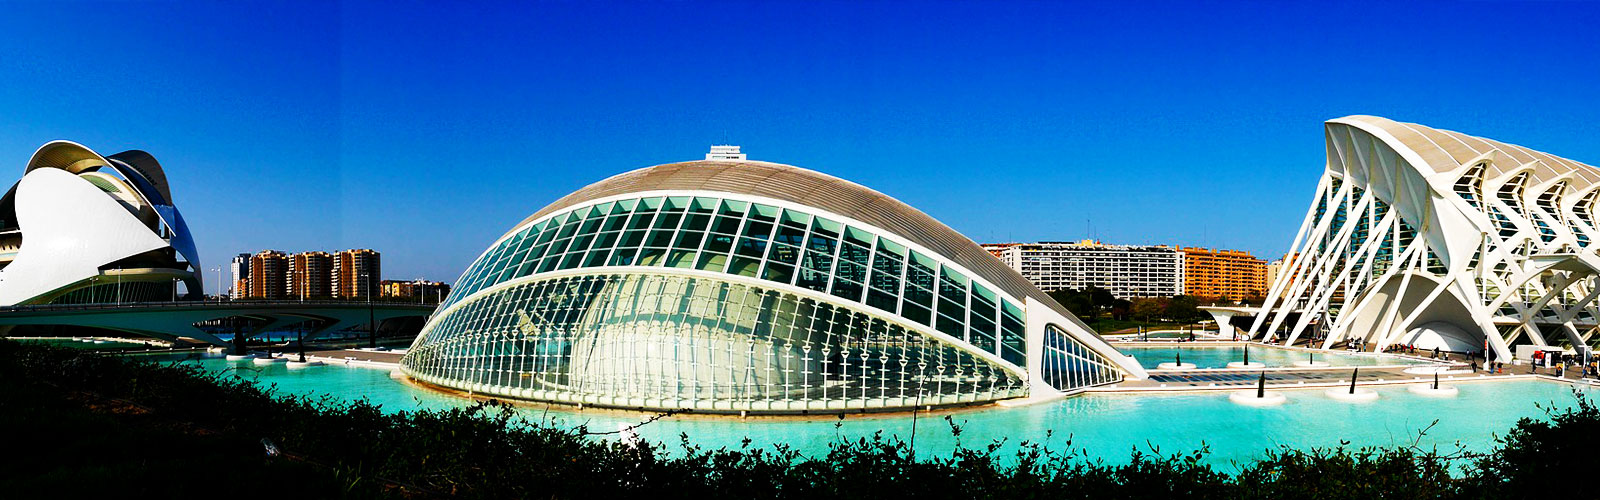 City of Arts and Science - Valencia Spain